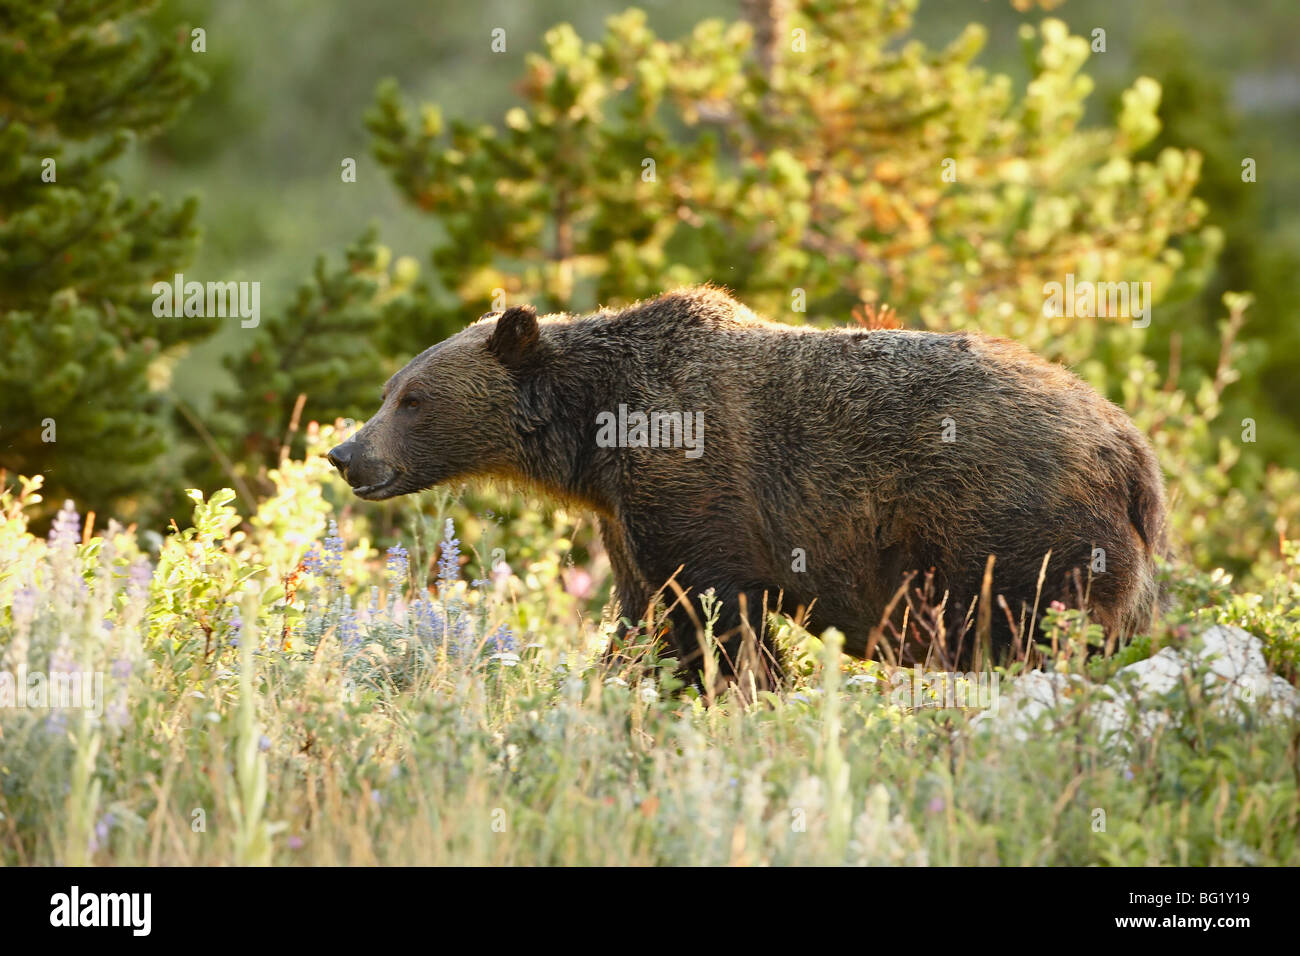 Grizzly bear (Ursus horribilis), Glacier National Park, Montana, United States of America, North America Stock Photo